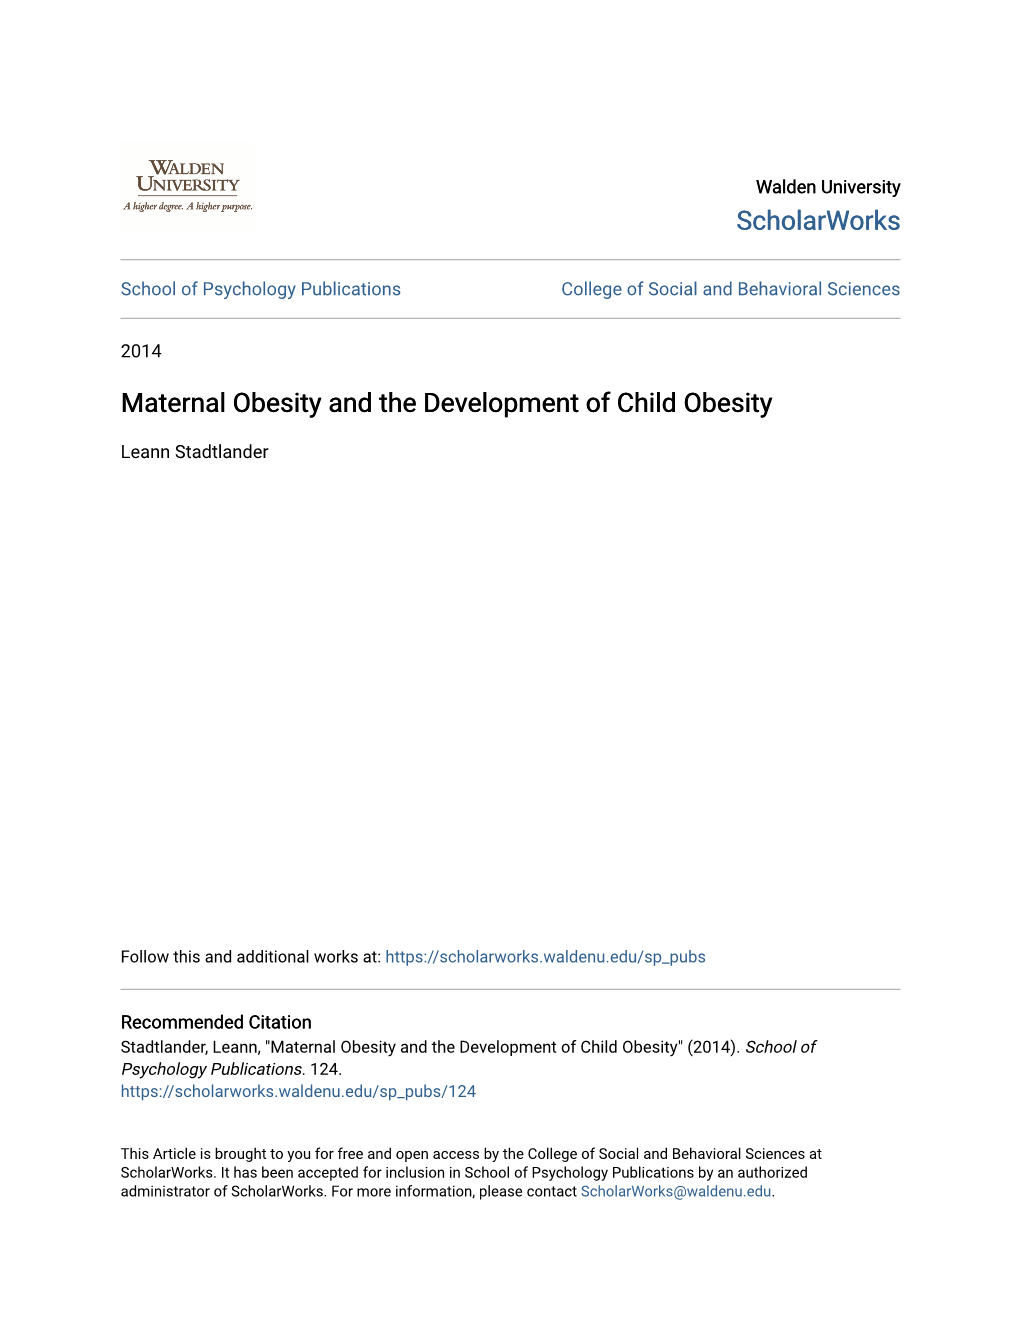 Maternal Obesity and the Development of Child Obesity